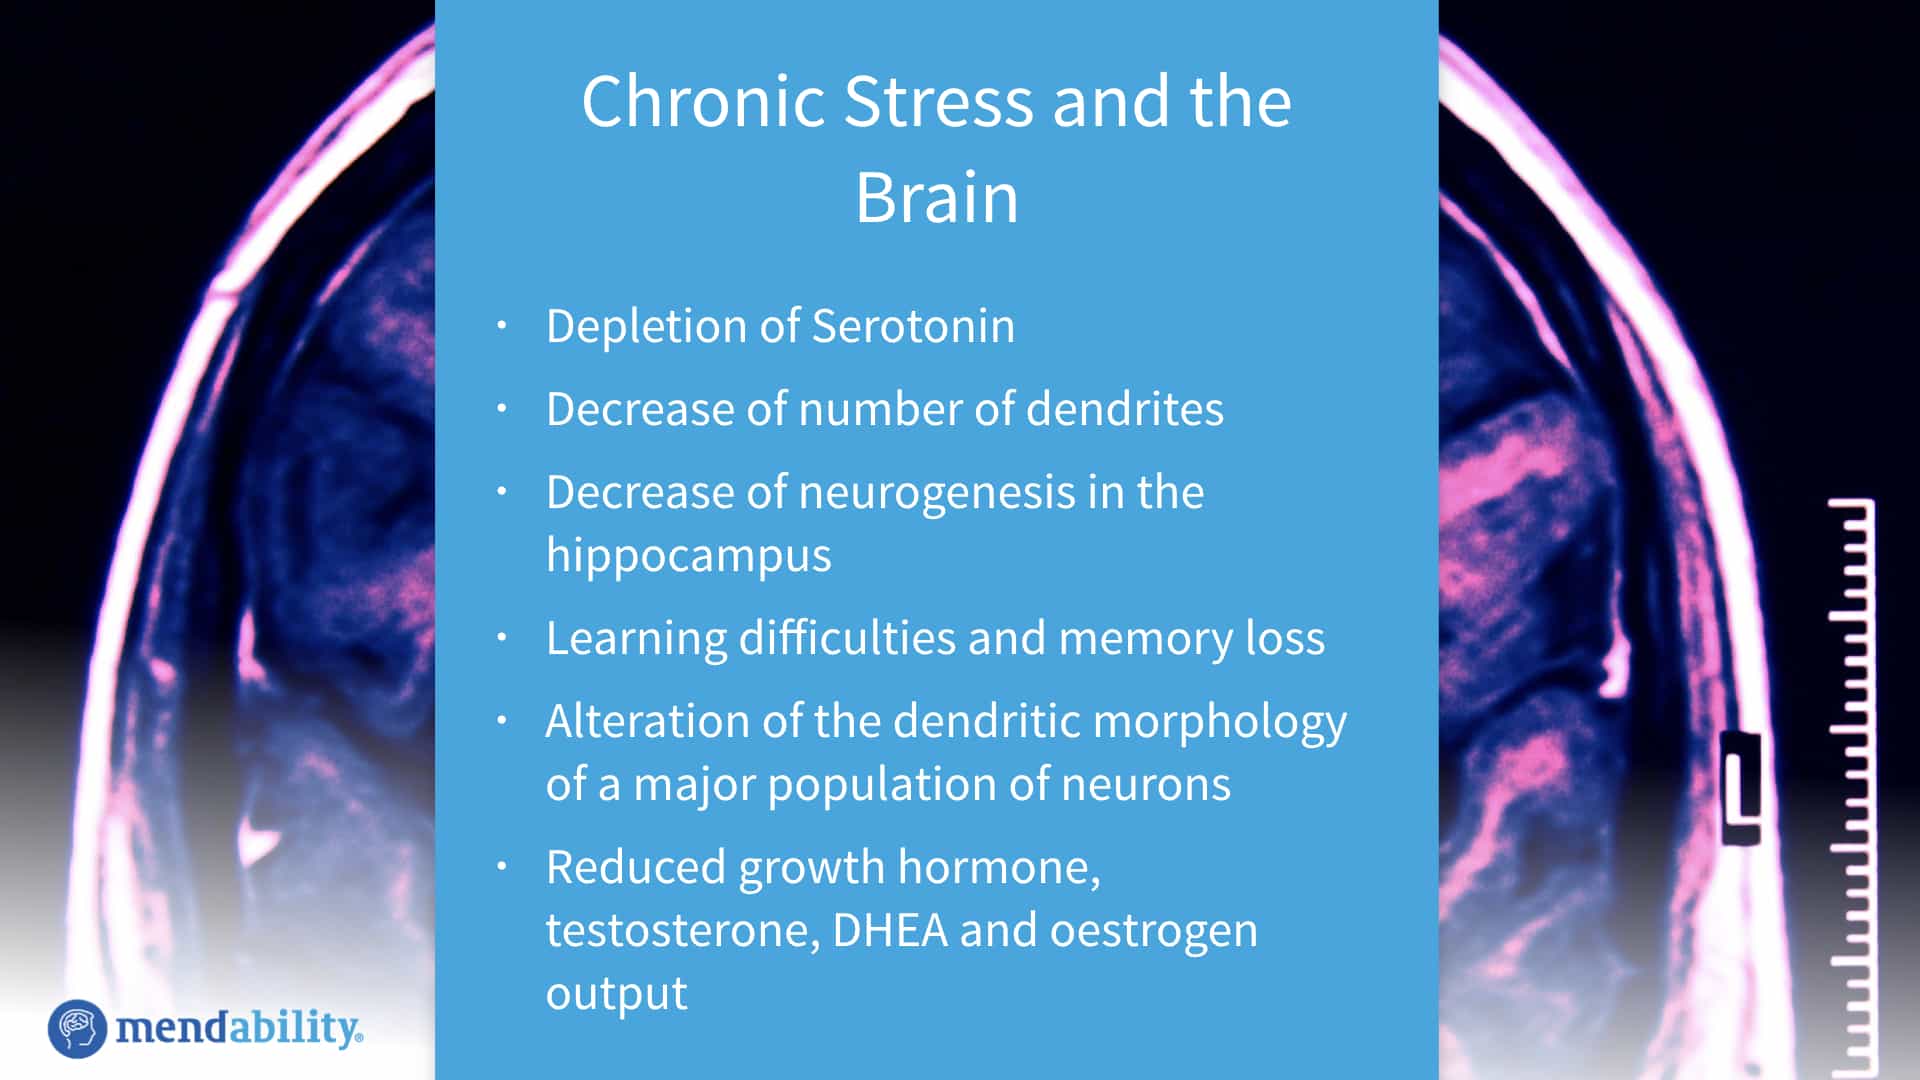 Neurological effects of chronic stress and cortisol